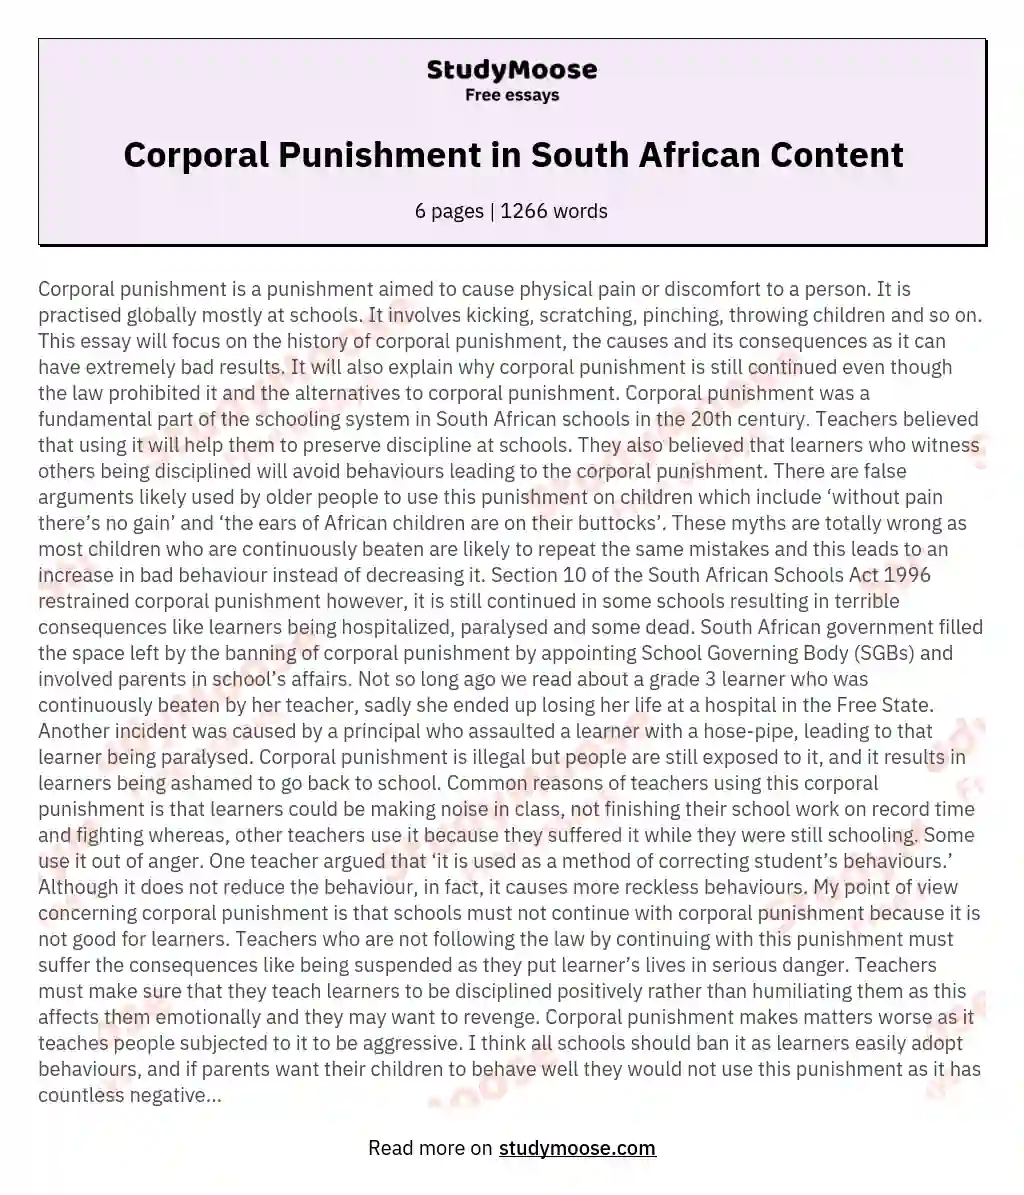 is corporal punishment legal in south african schools